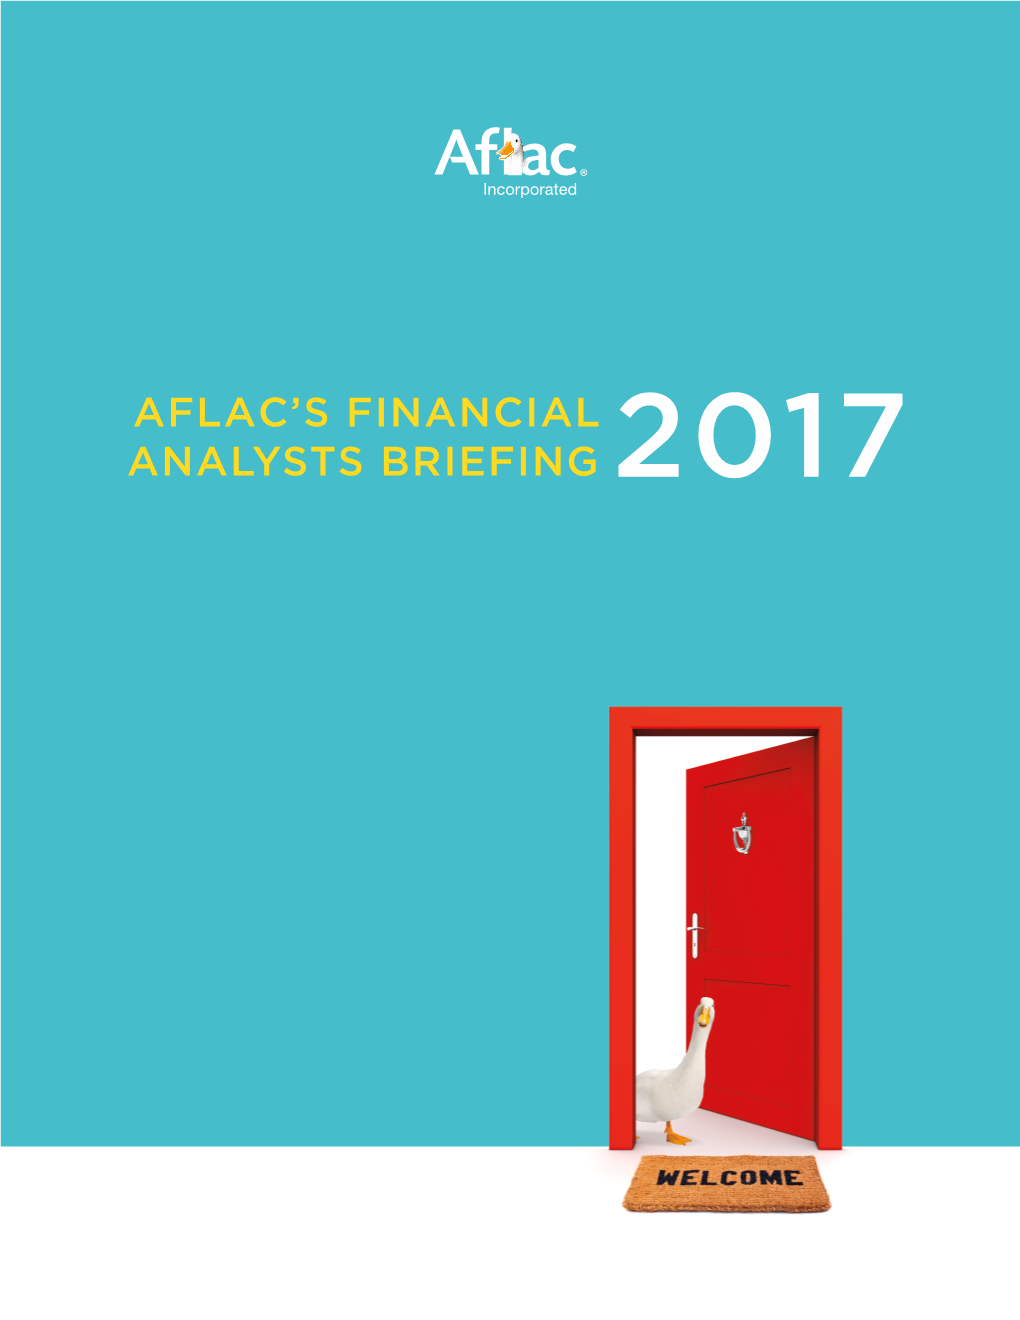 Aflac's Financial Analysts Briefing 2017